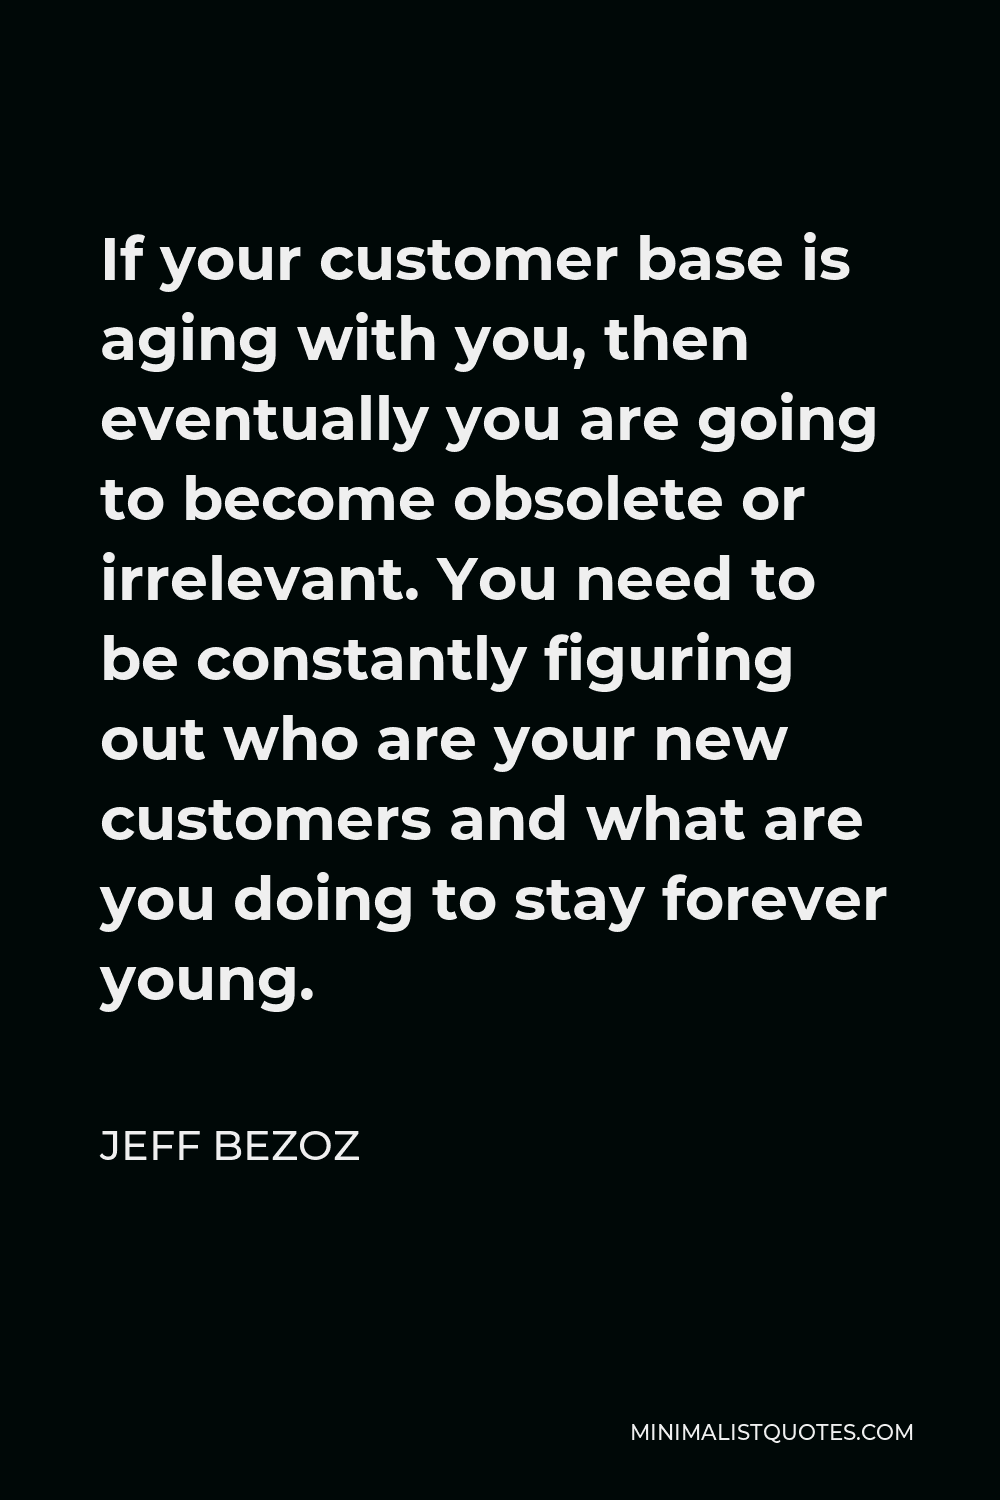 Jeff Bezoz Quote - If your customer base is aging with you, then eventually you are going to become obsolete or irrelevant. You need to be constantly figuring out who are your new customers and what are you doing to stay forever young.